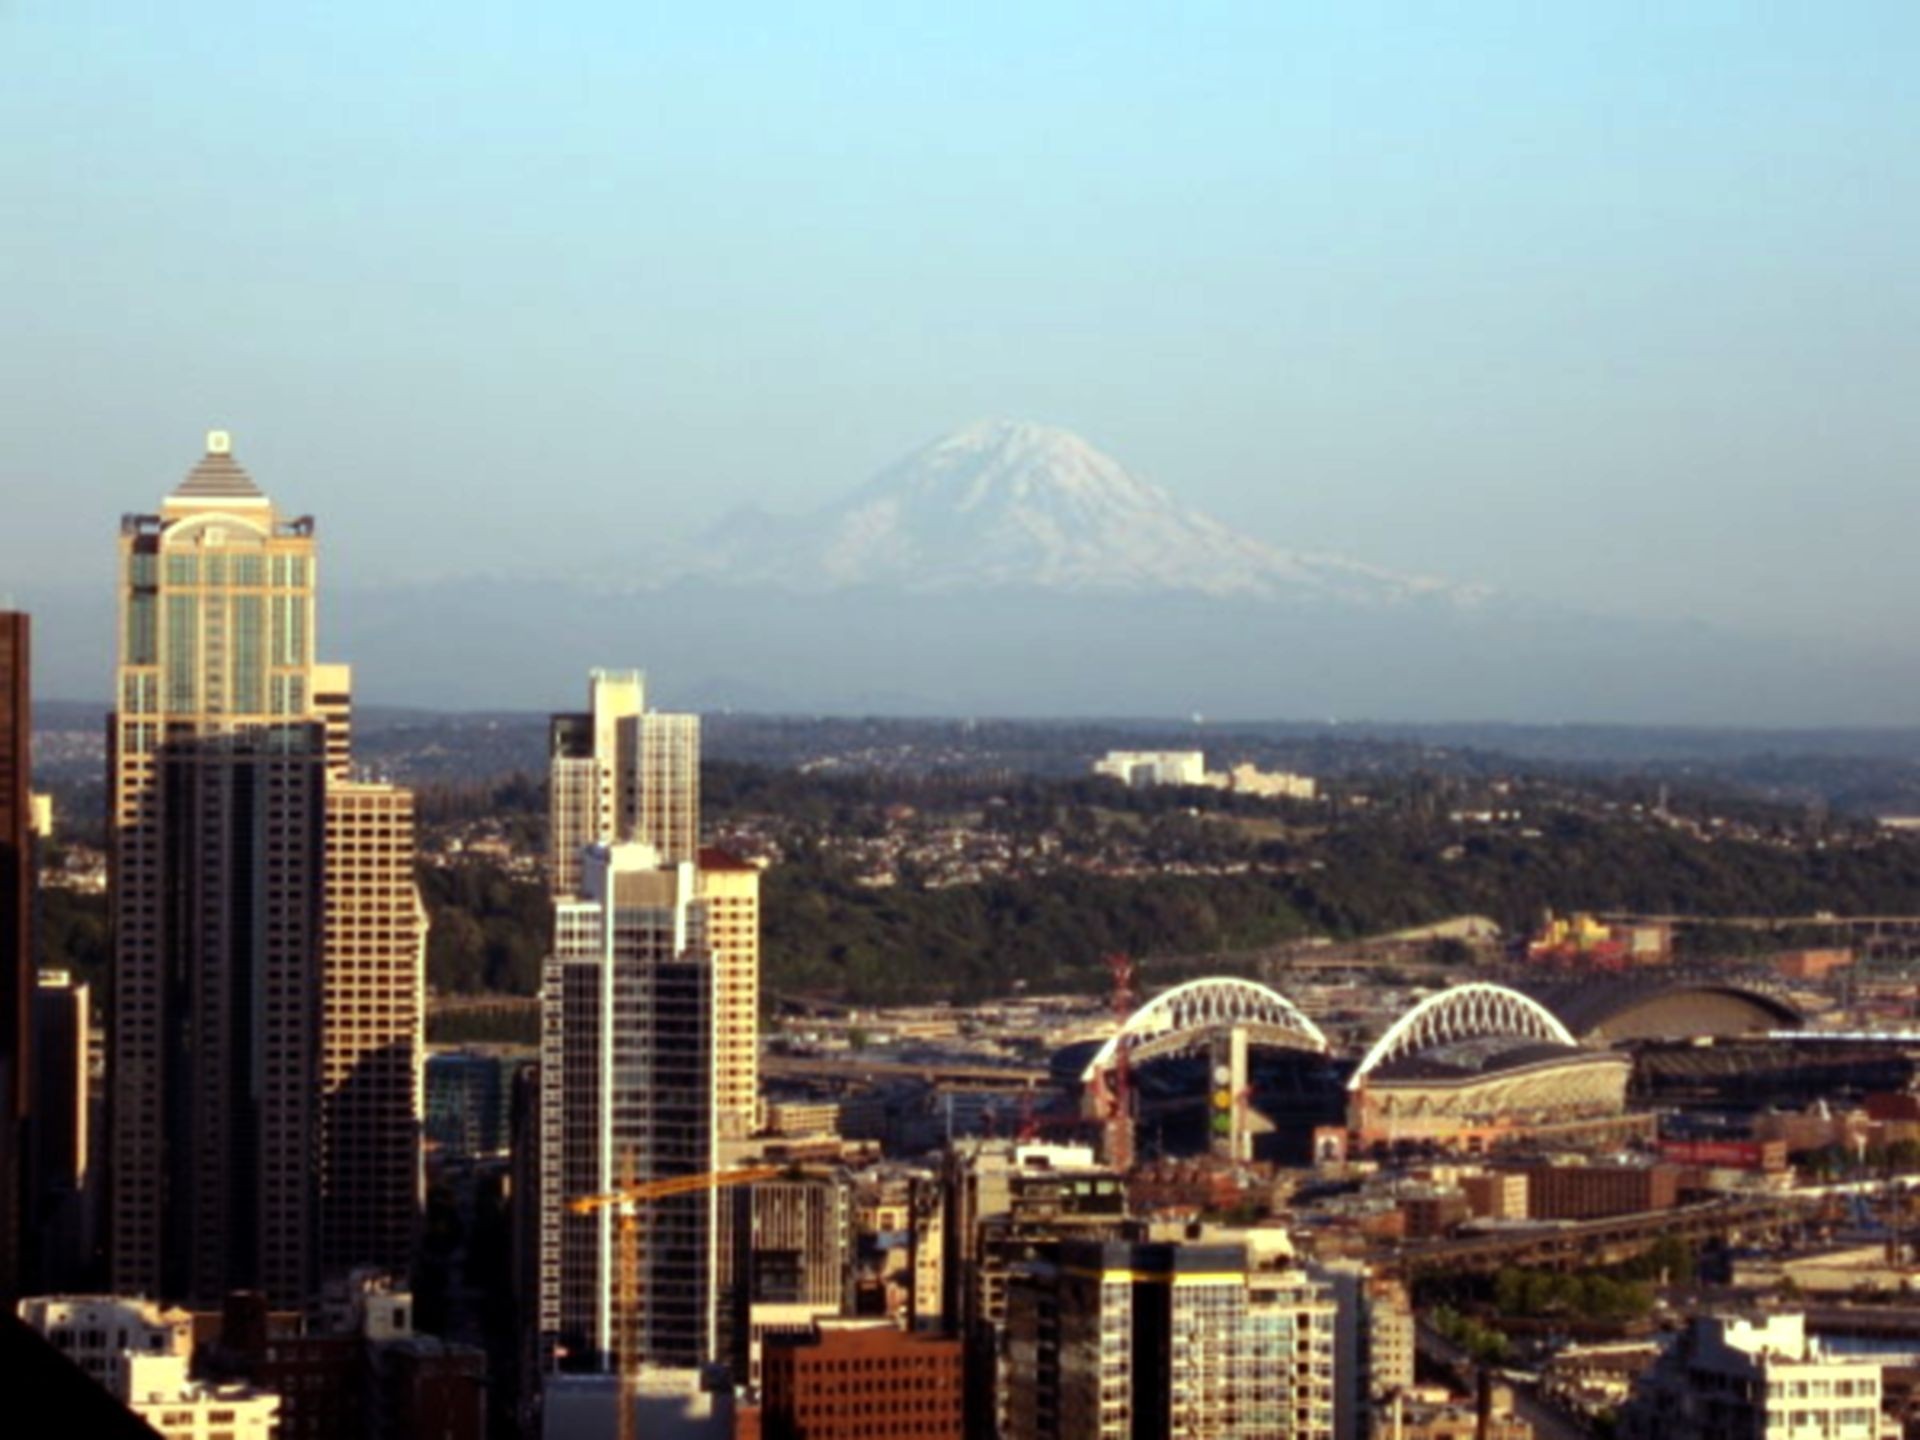 Buildings viewed from Space Needle with Mount Rainier in the background.